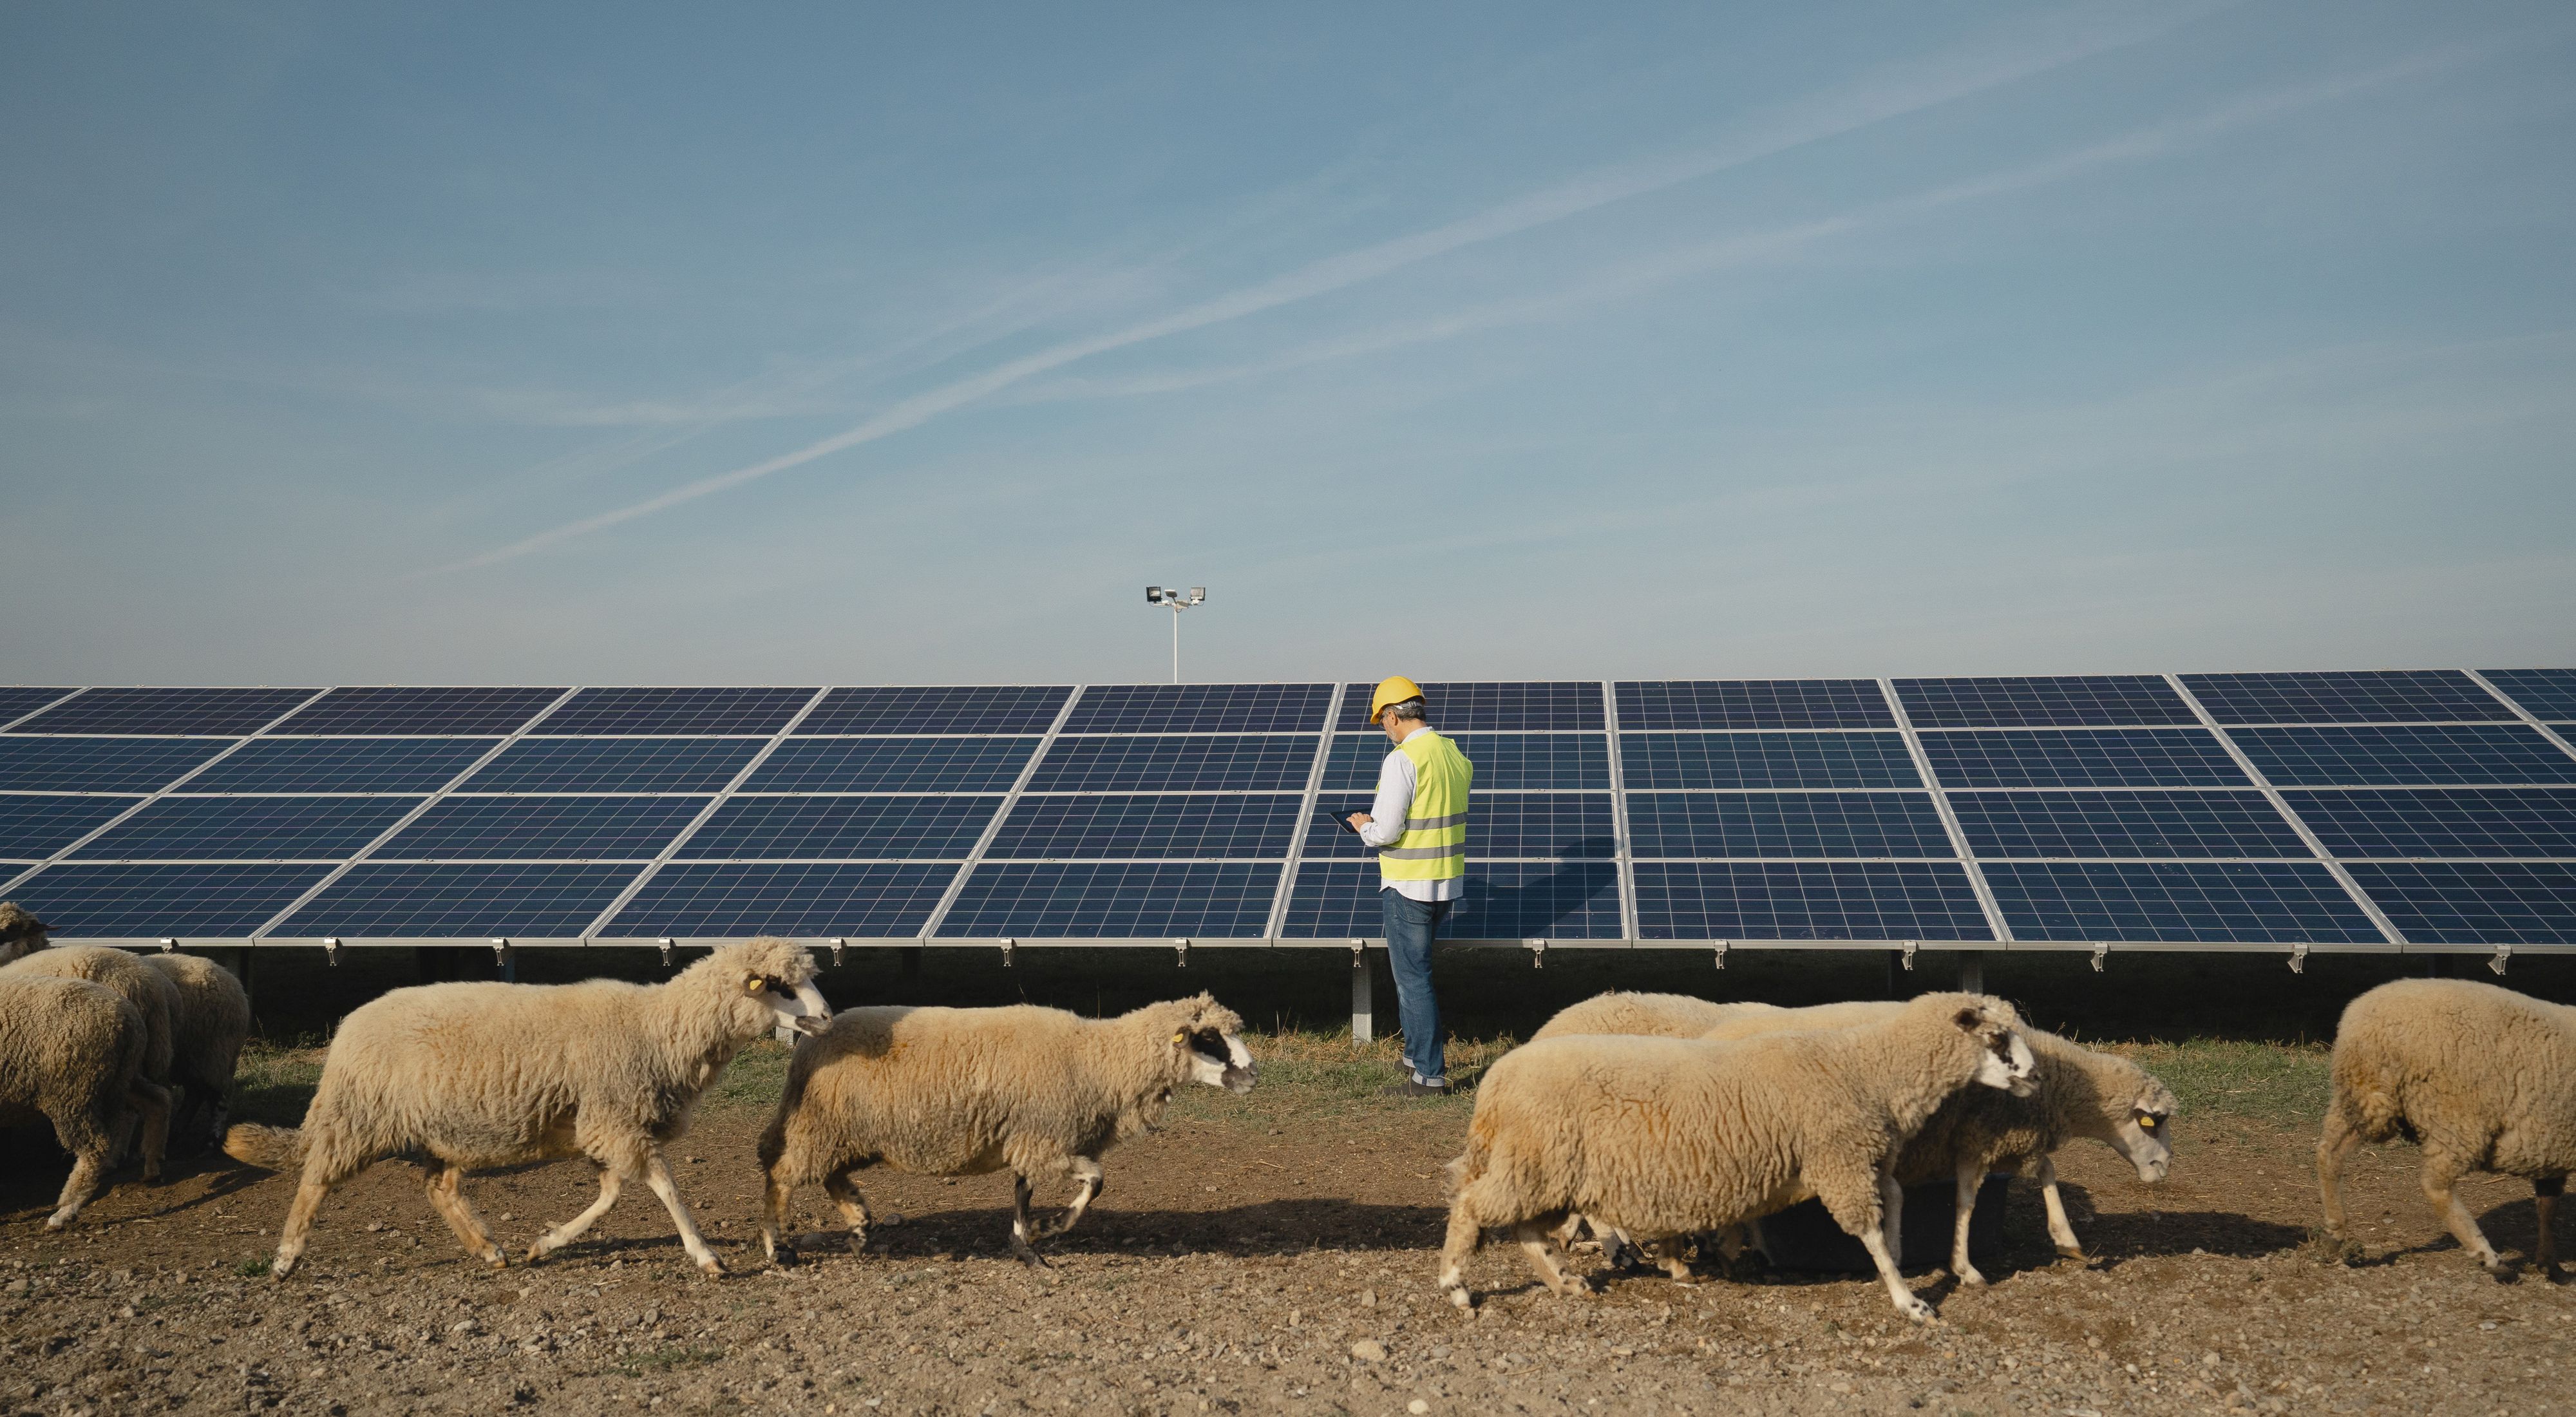 A flock of sheep walk in front of solar panels and a worker in a yellow jacket holding a tablet.